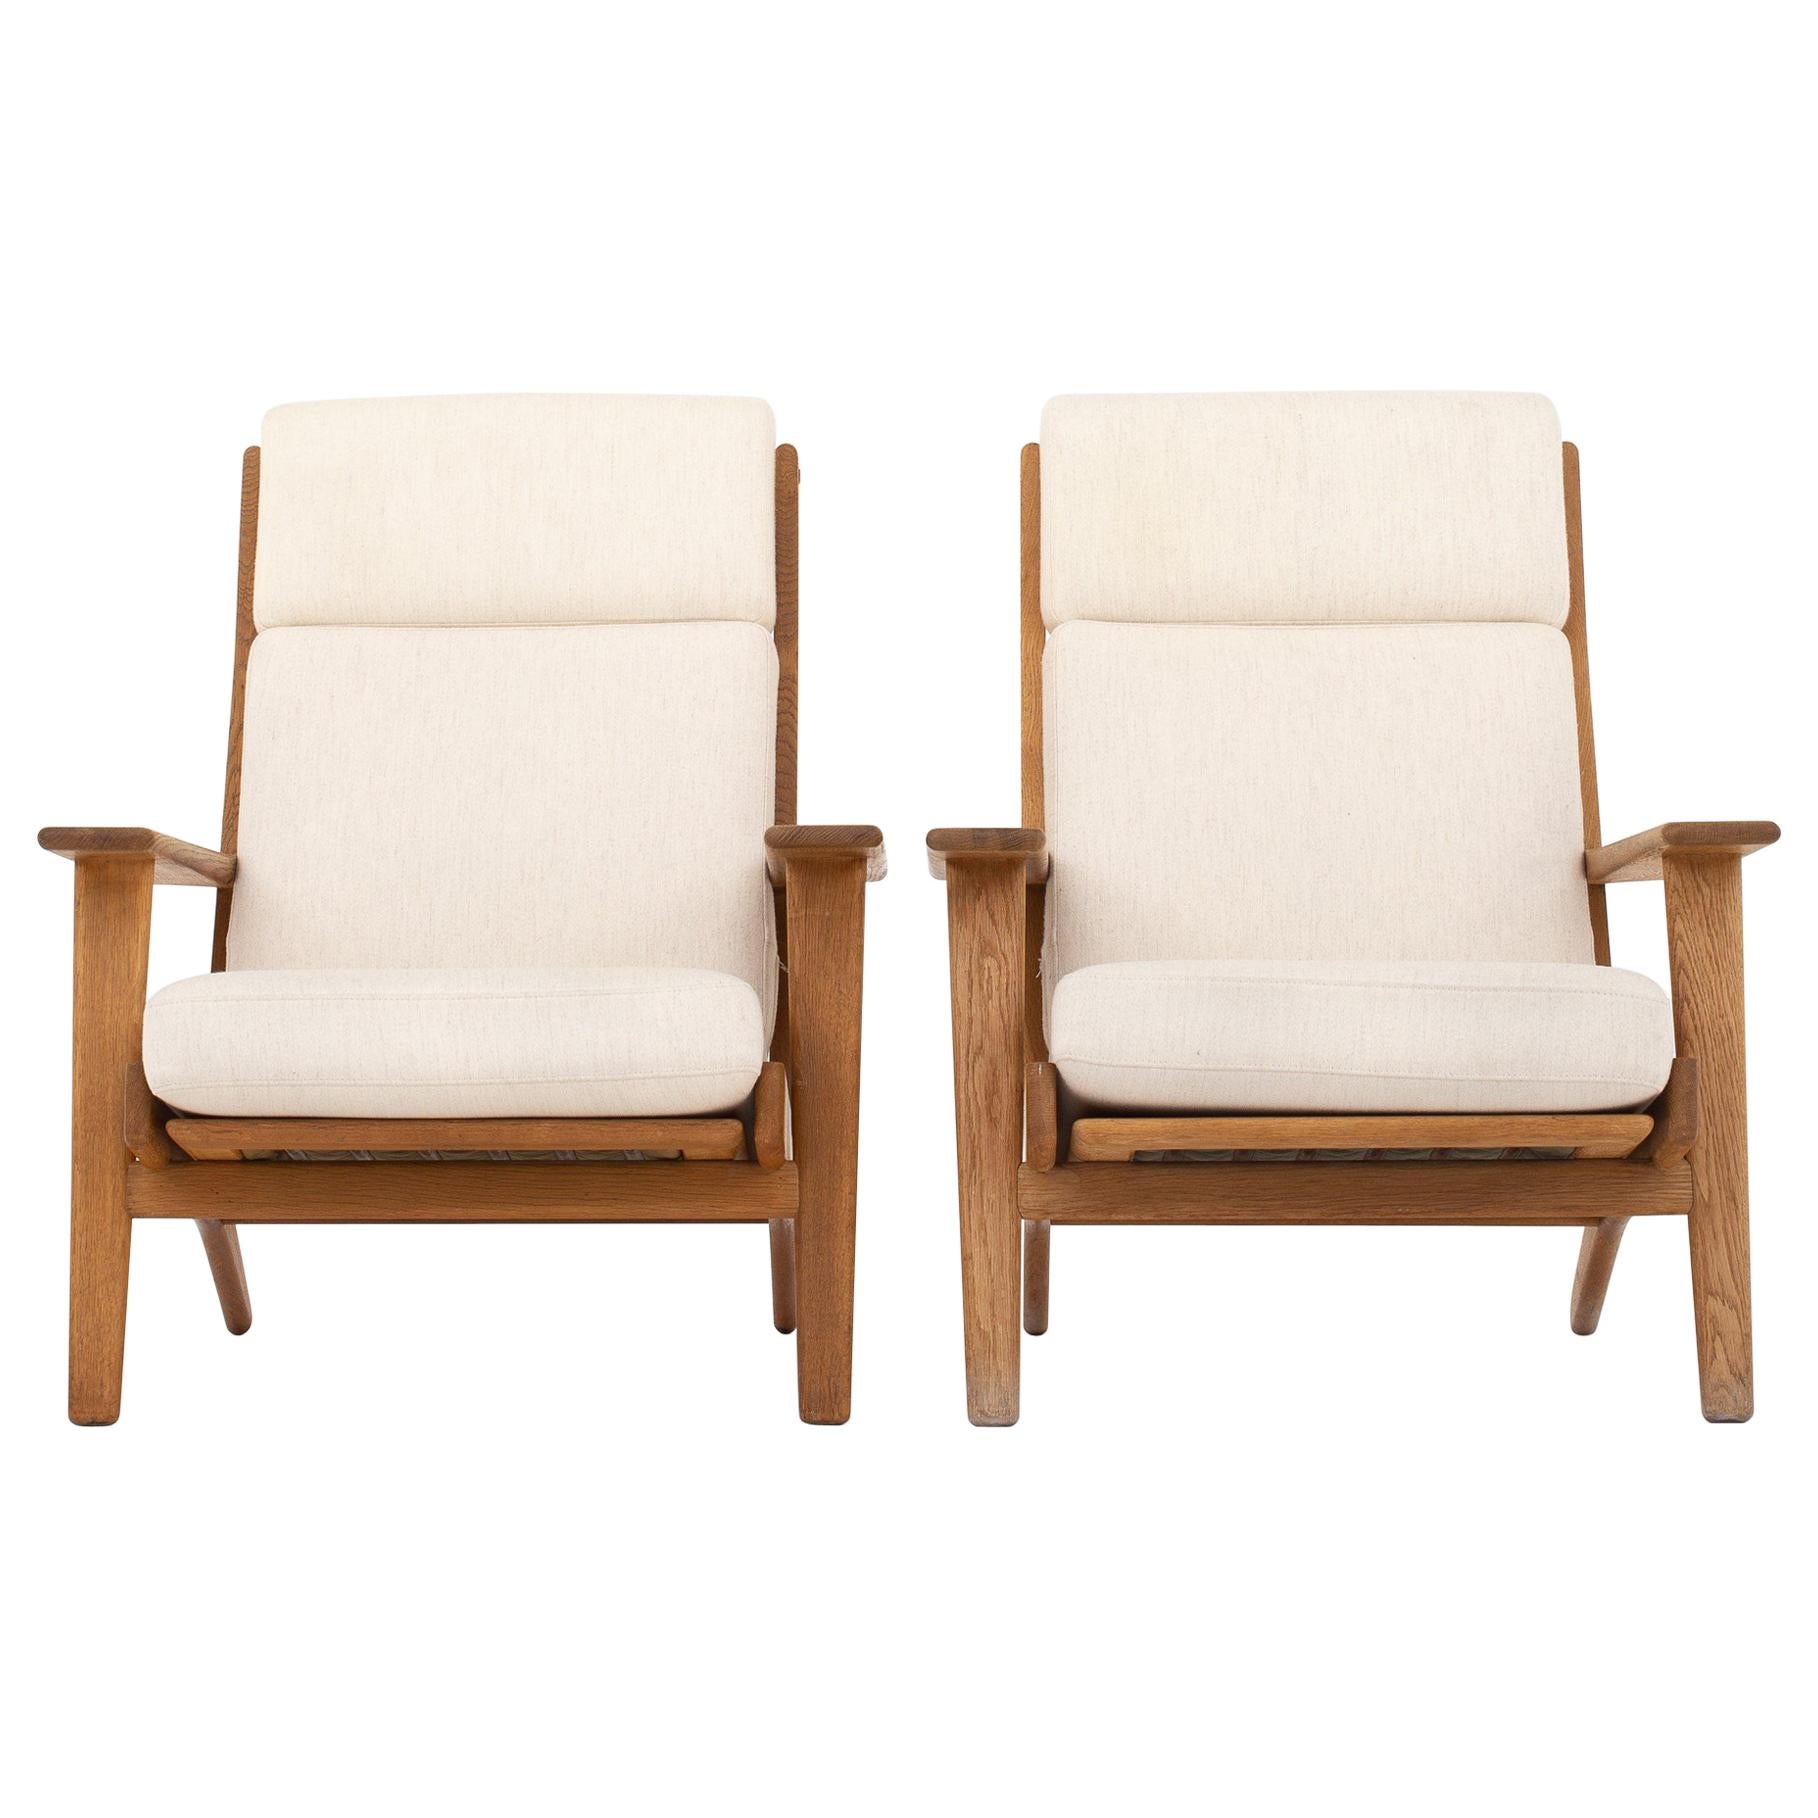 Two Easy Chairs by Hans J. Wegner